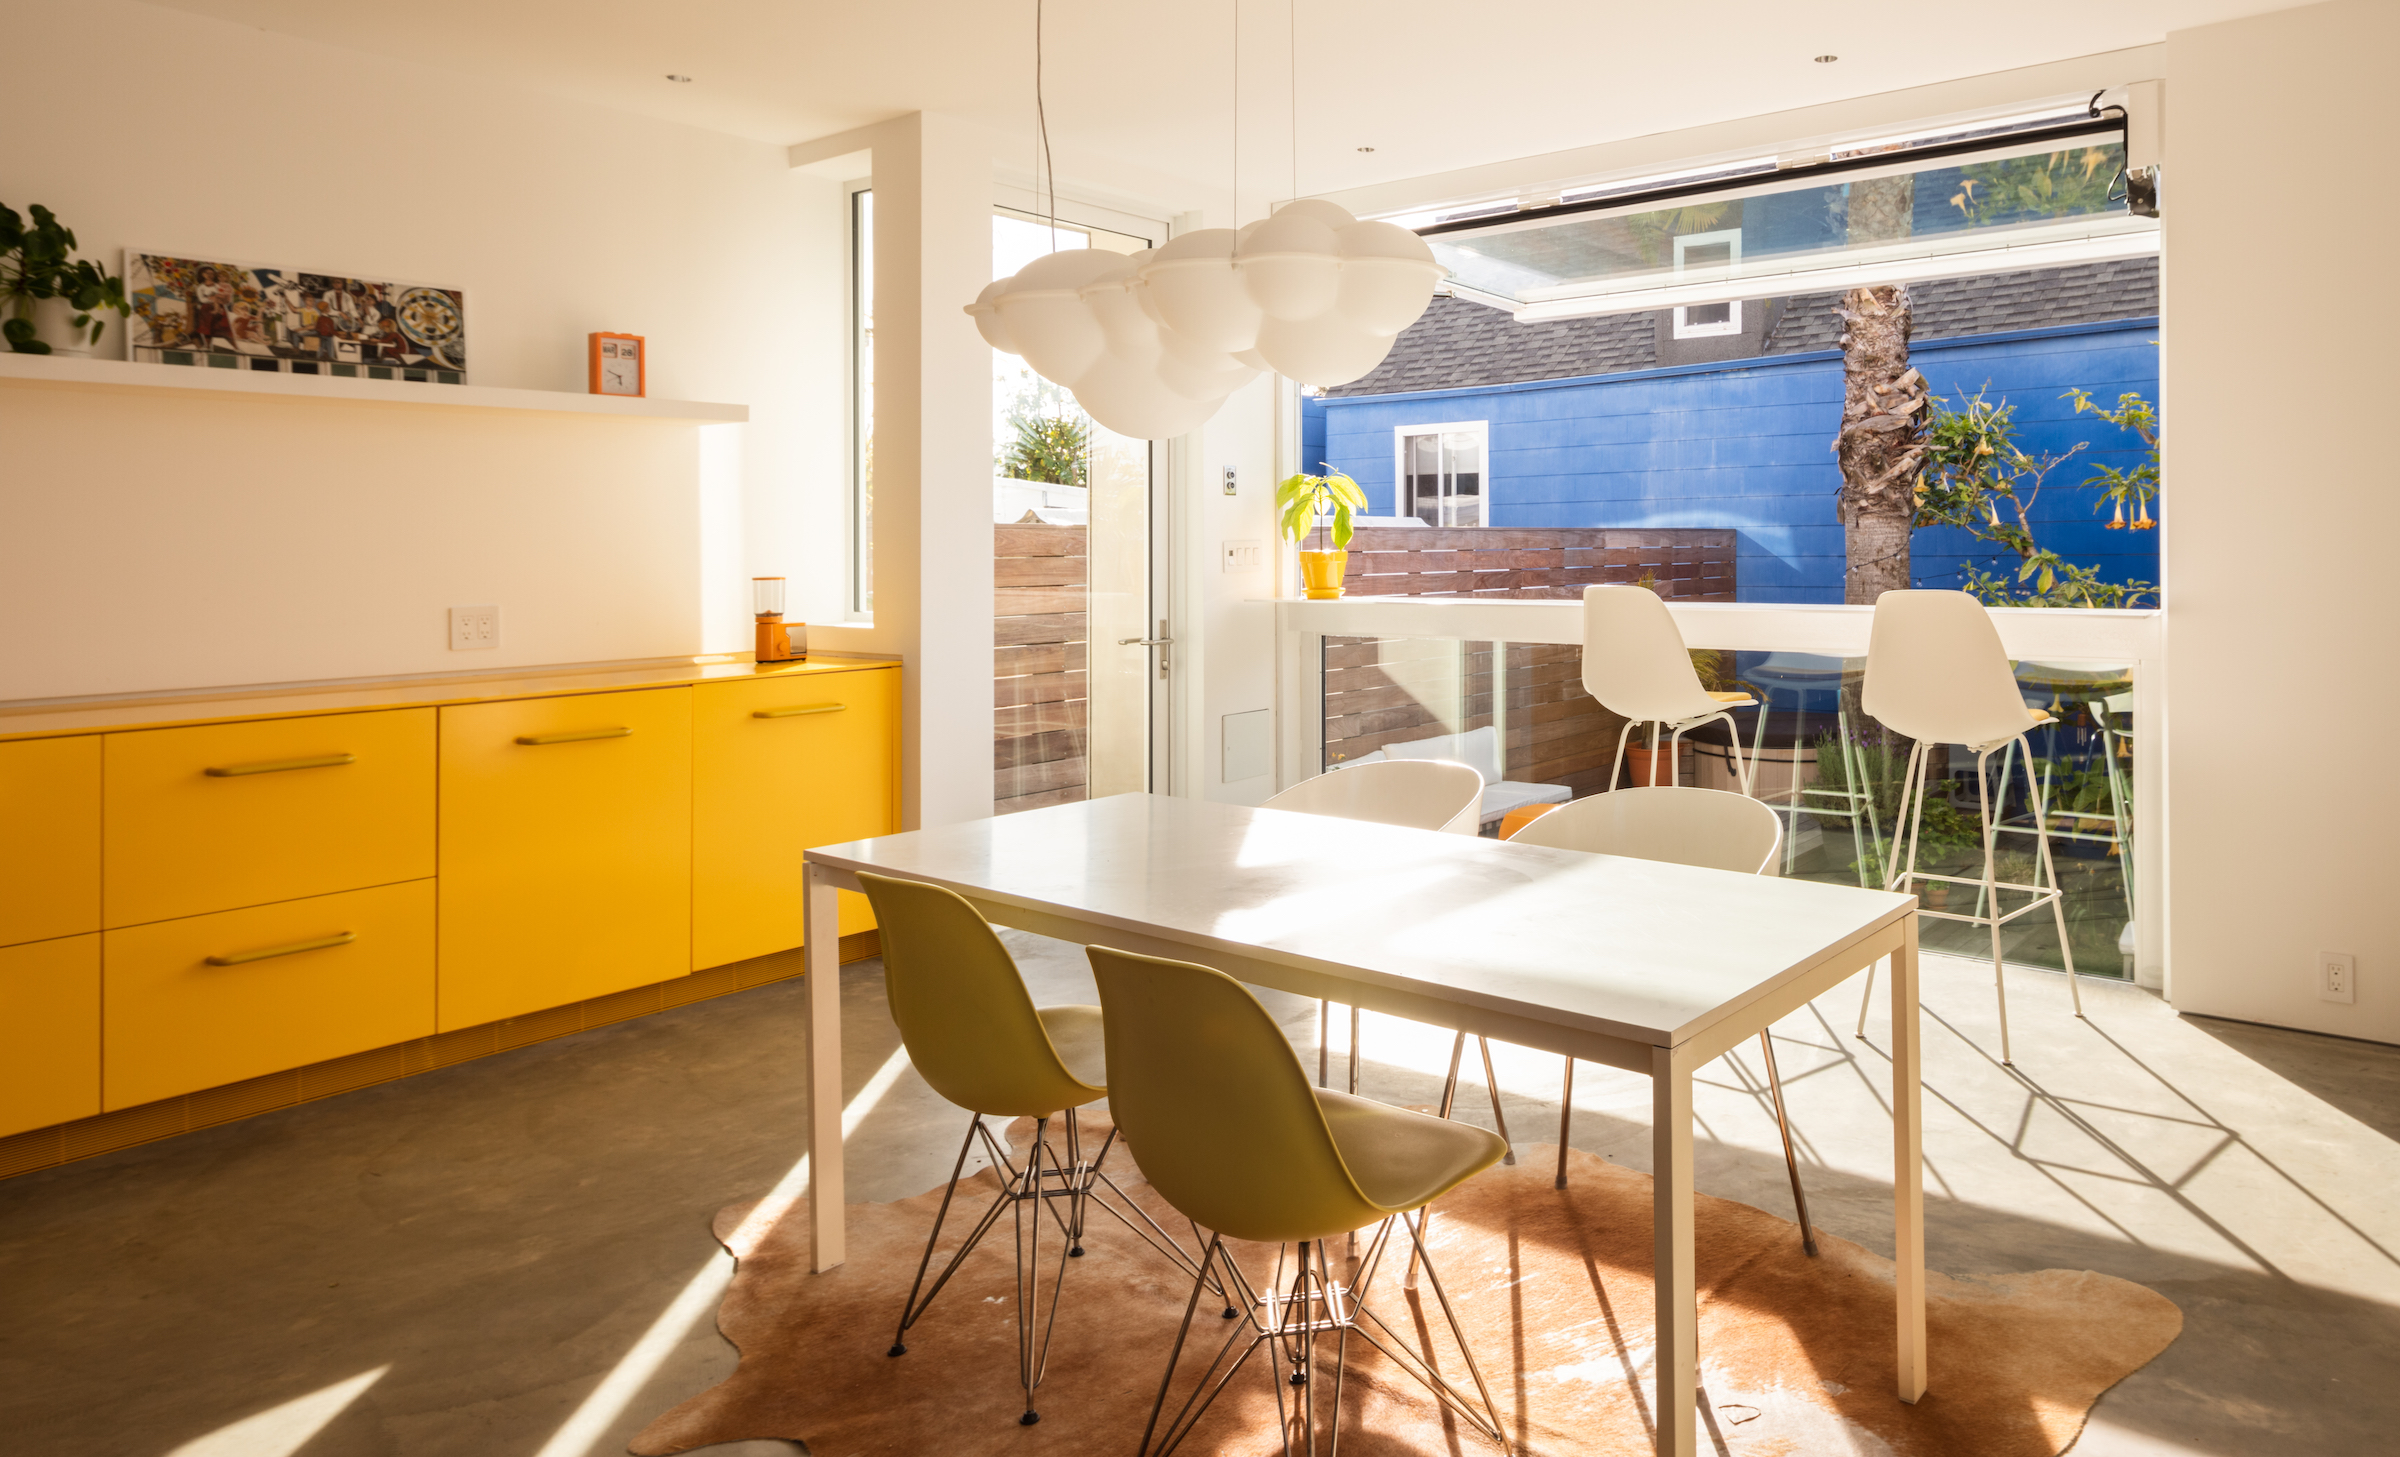 Bright dining area with a white table, olive chairs, yellow cabinets, and view to a patio with blue walls and greenery.